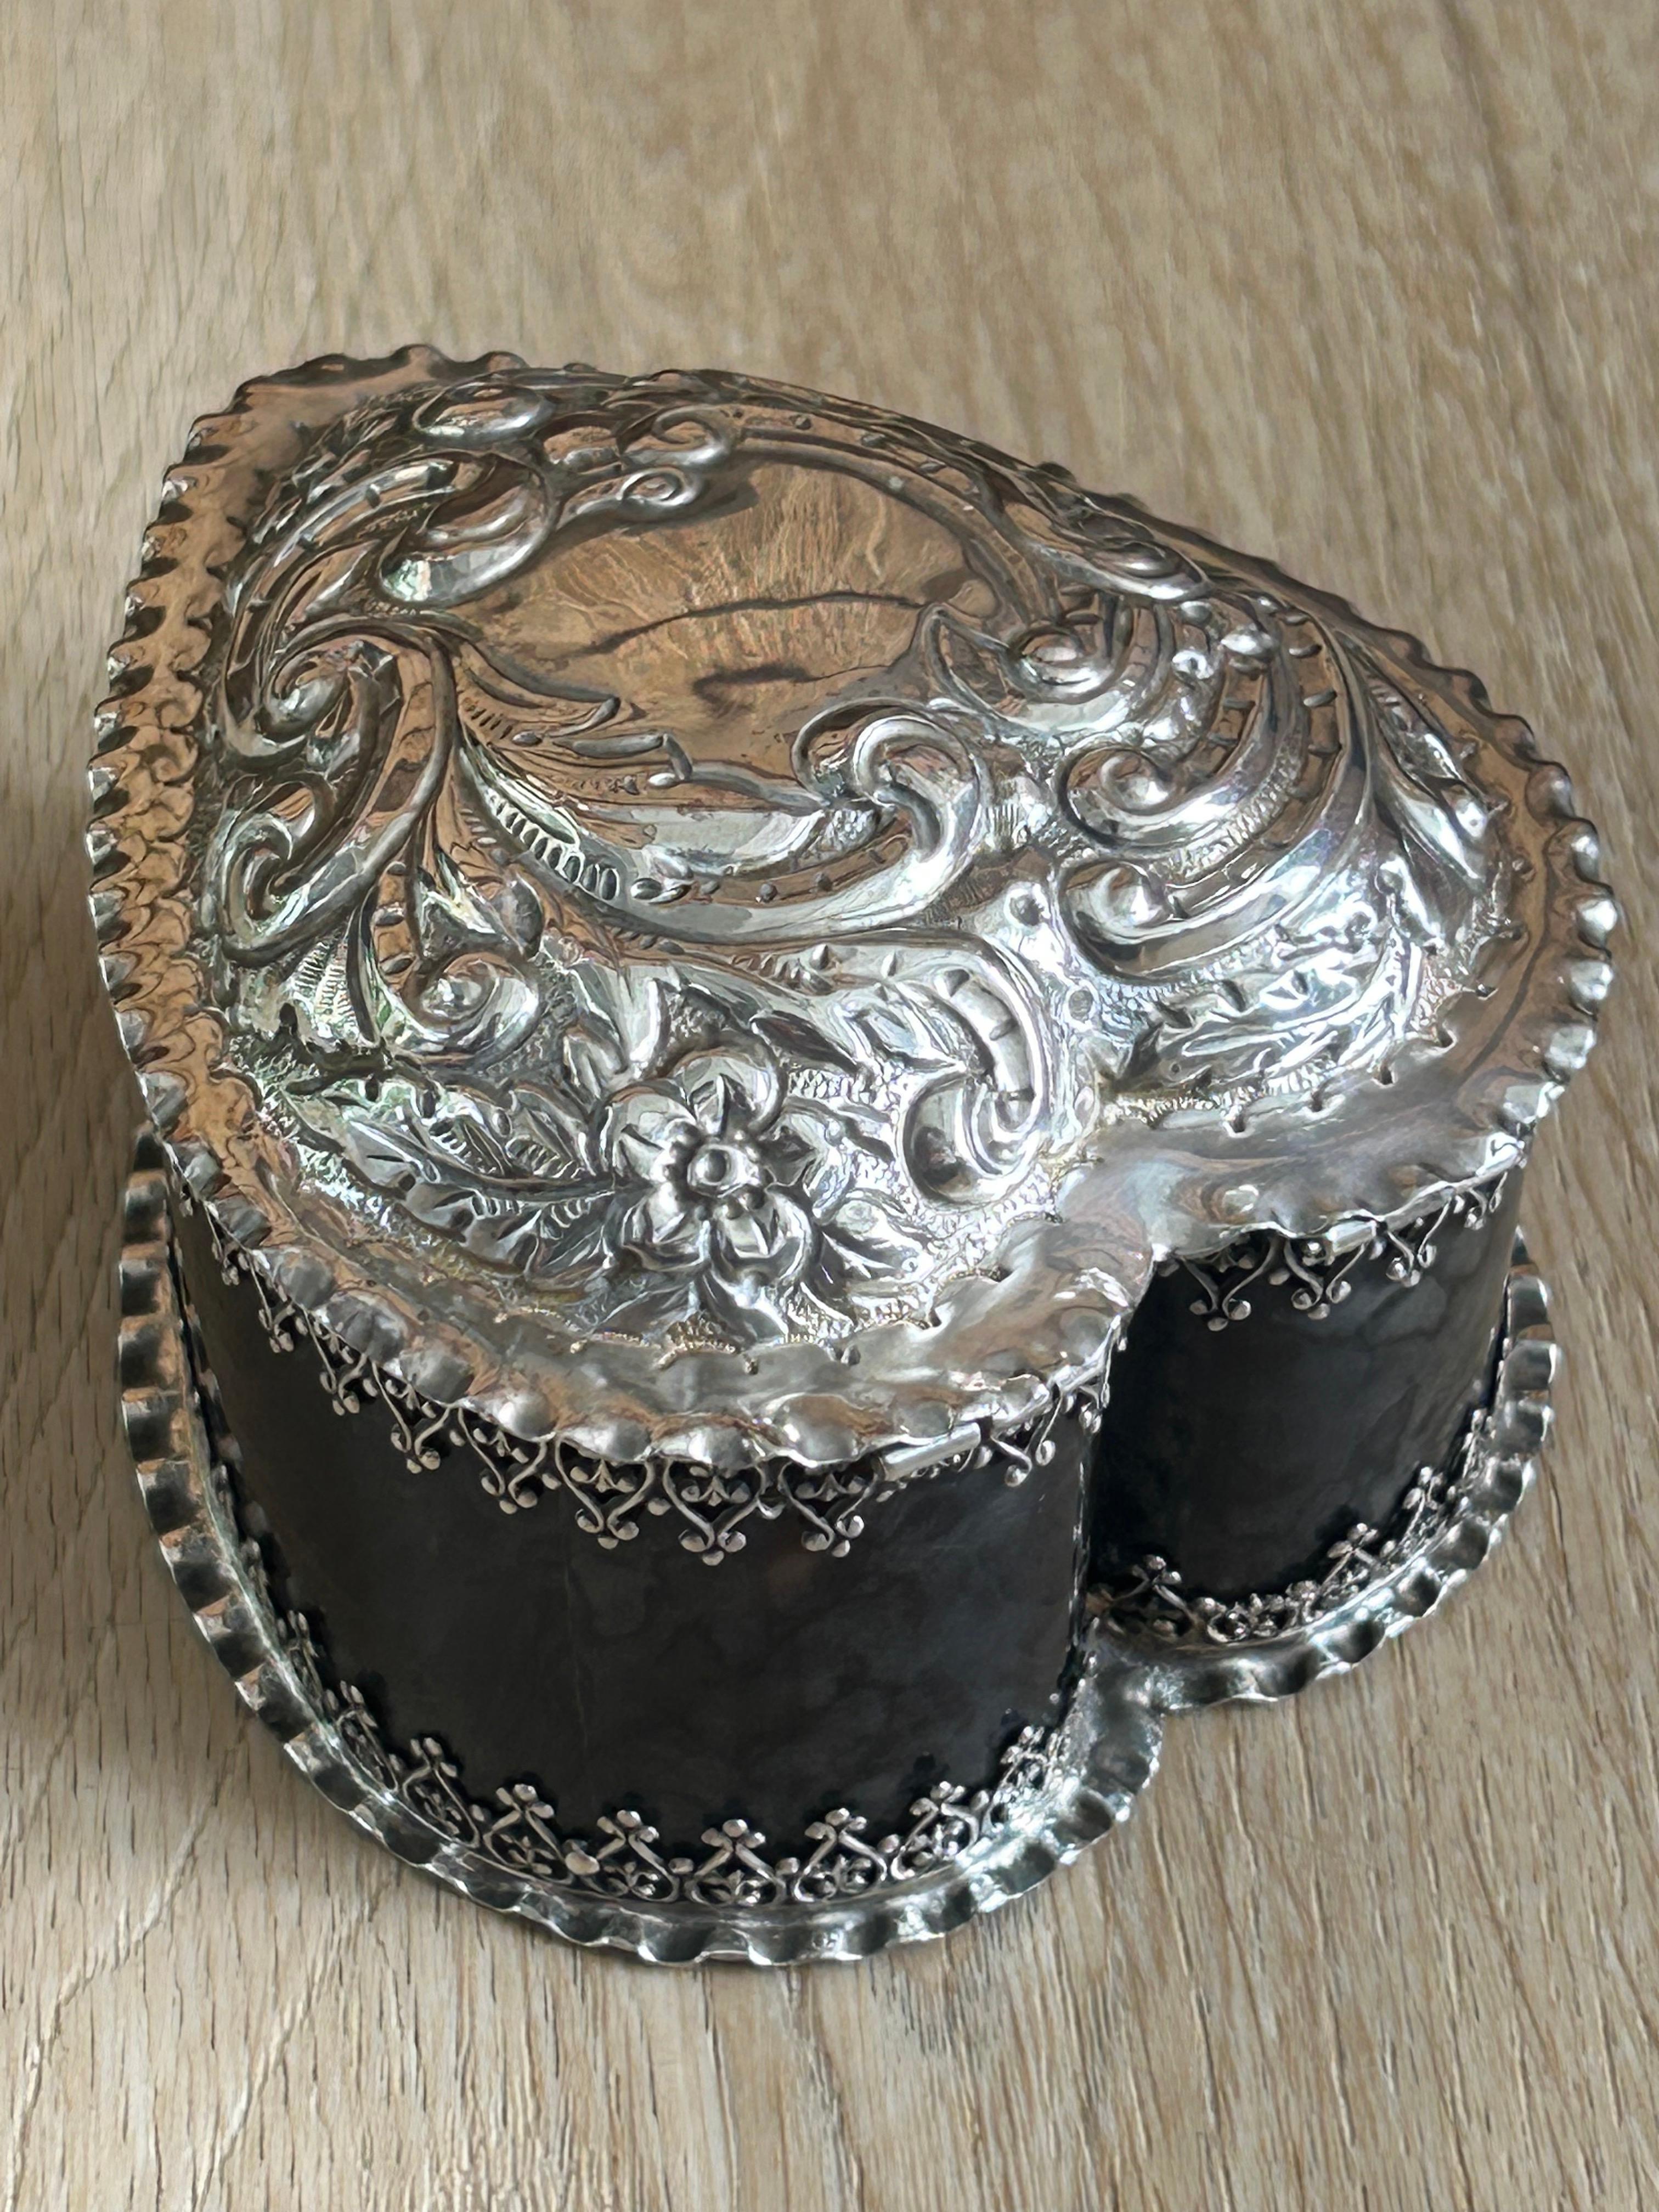 British 1893 Silver And Tortoiseshell Heart Shaped Box For Sale